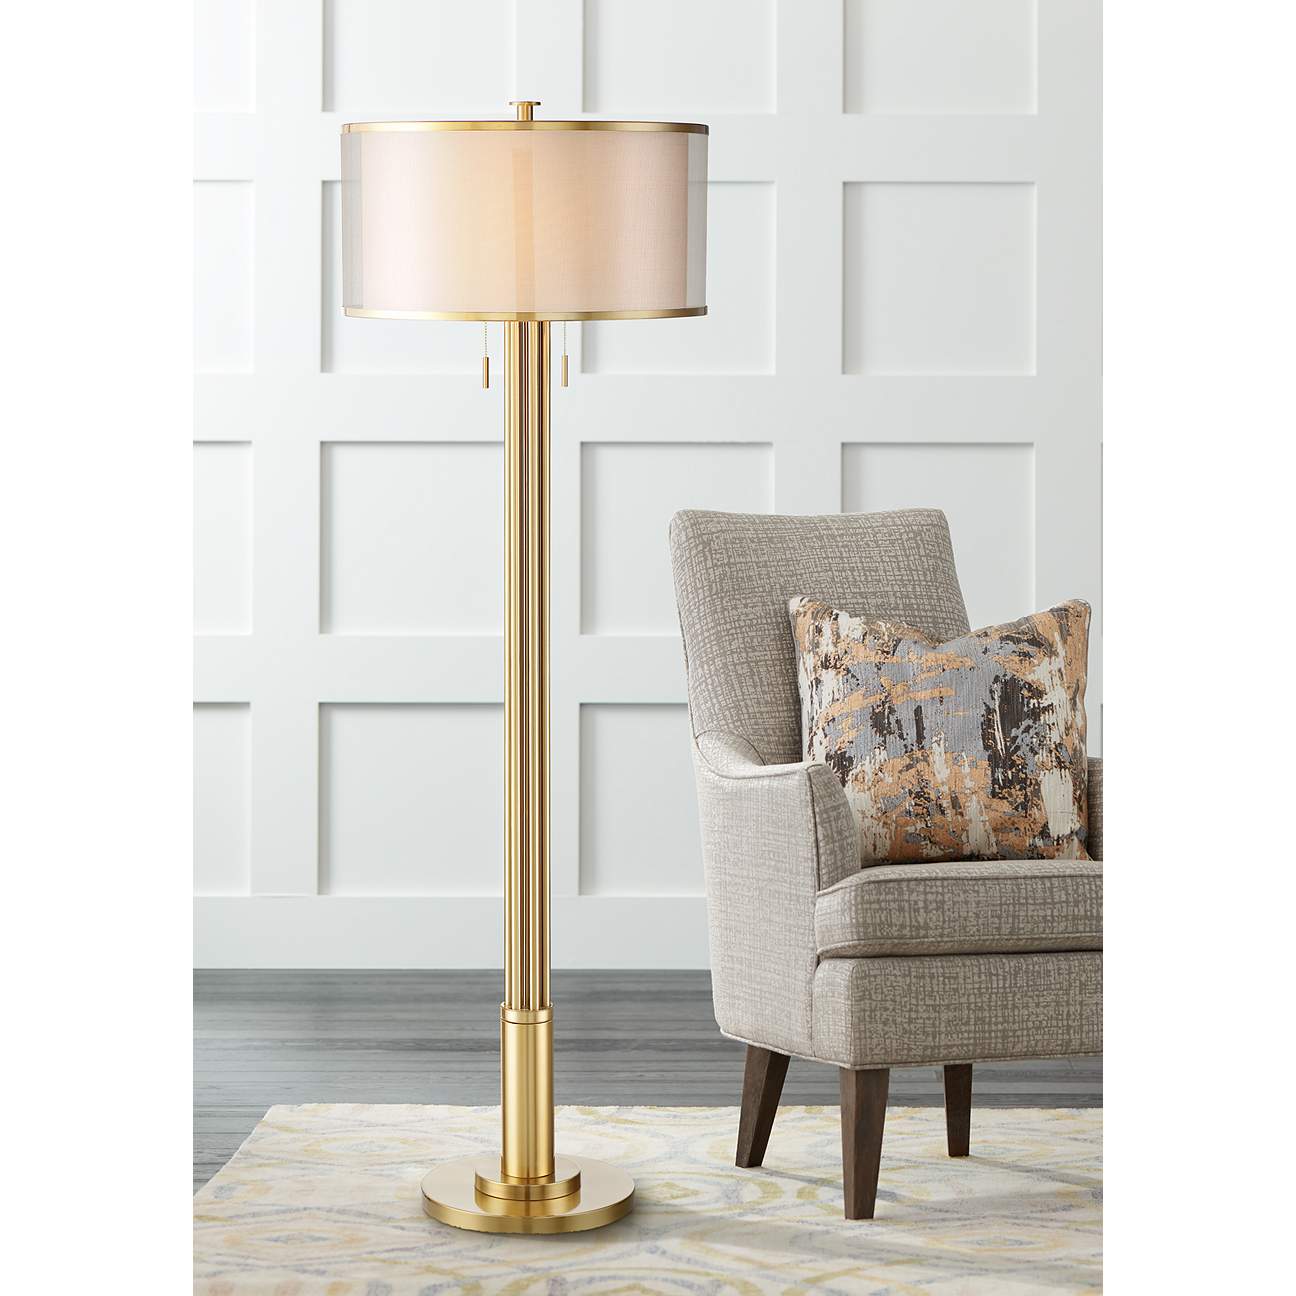 Possini Euro Granview Tall Floor Lamp with Double Shade - #39R87